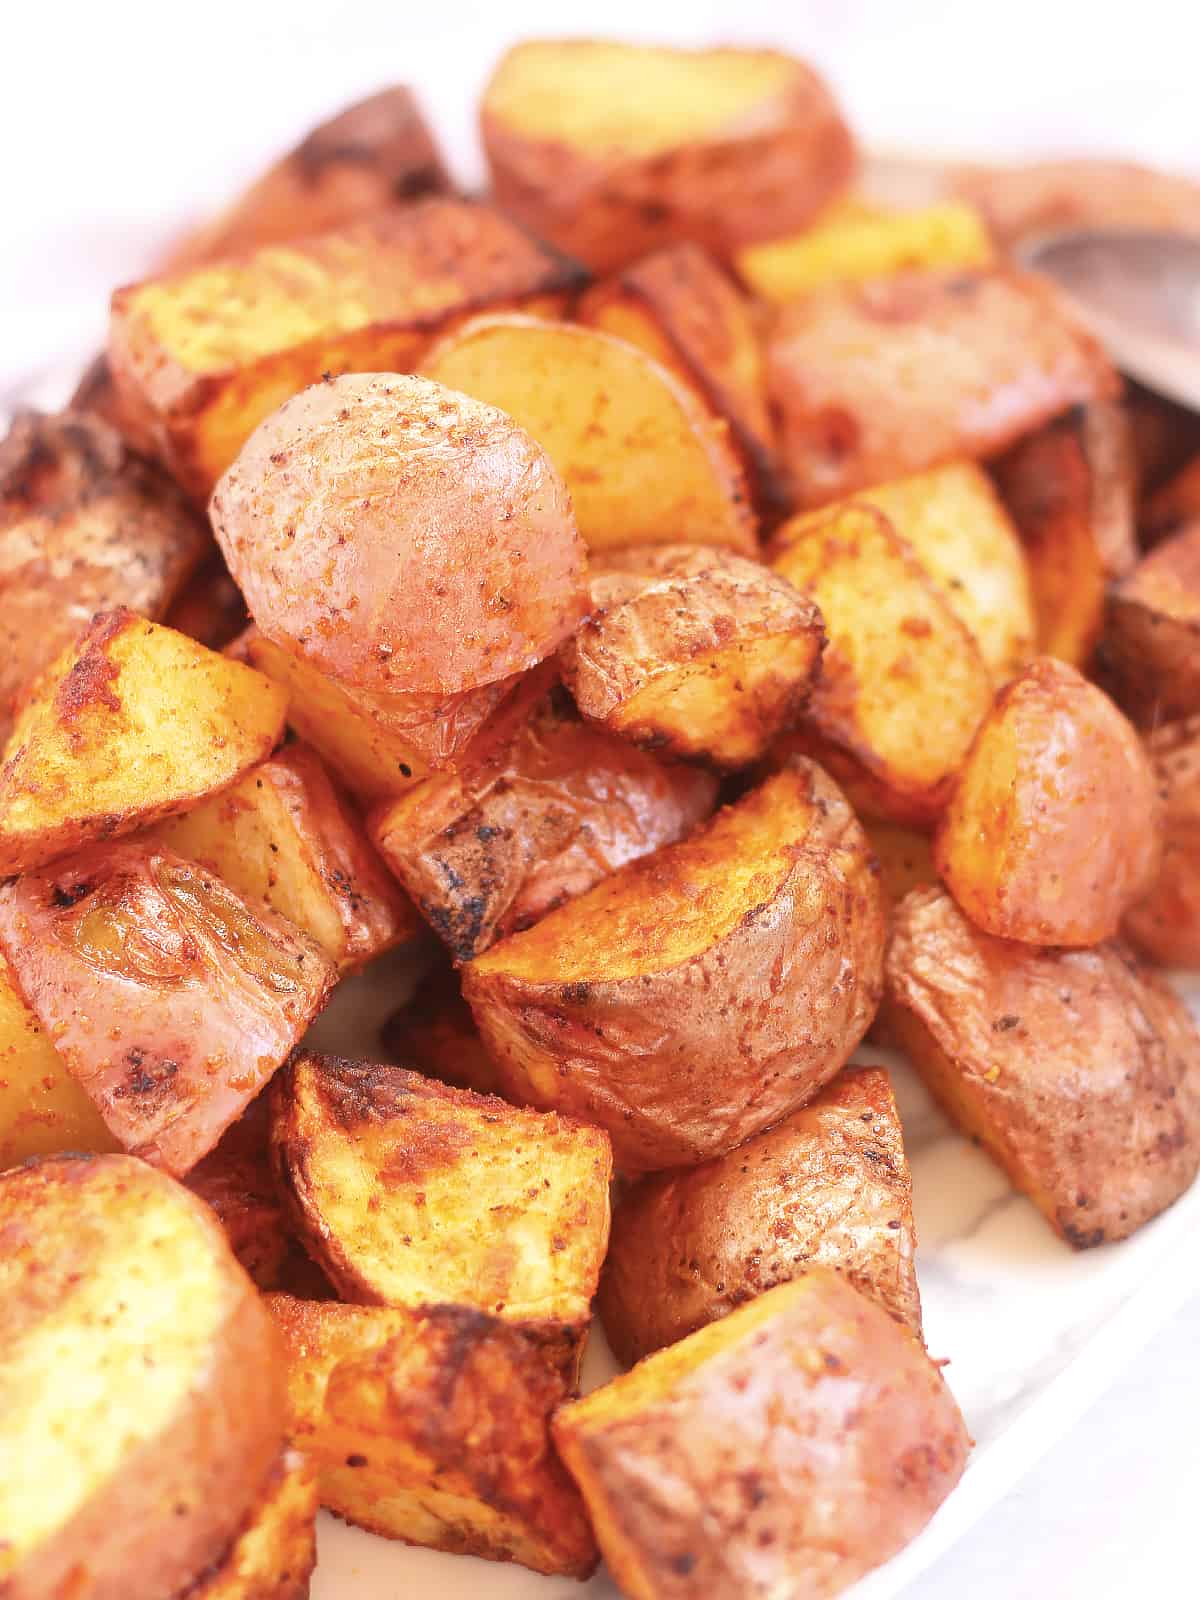 Red skinned roasted potatoes piled on top of each other.